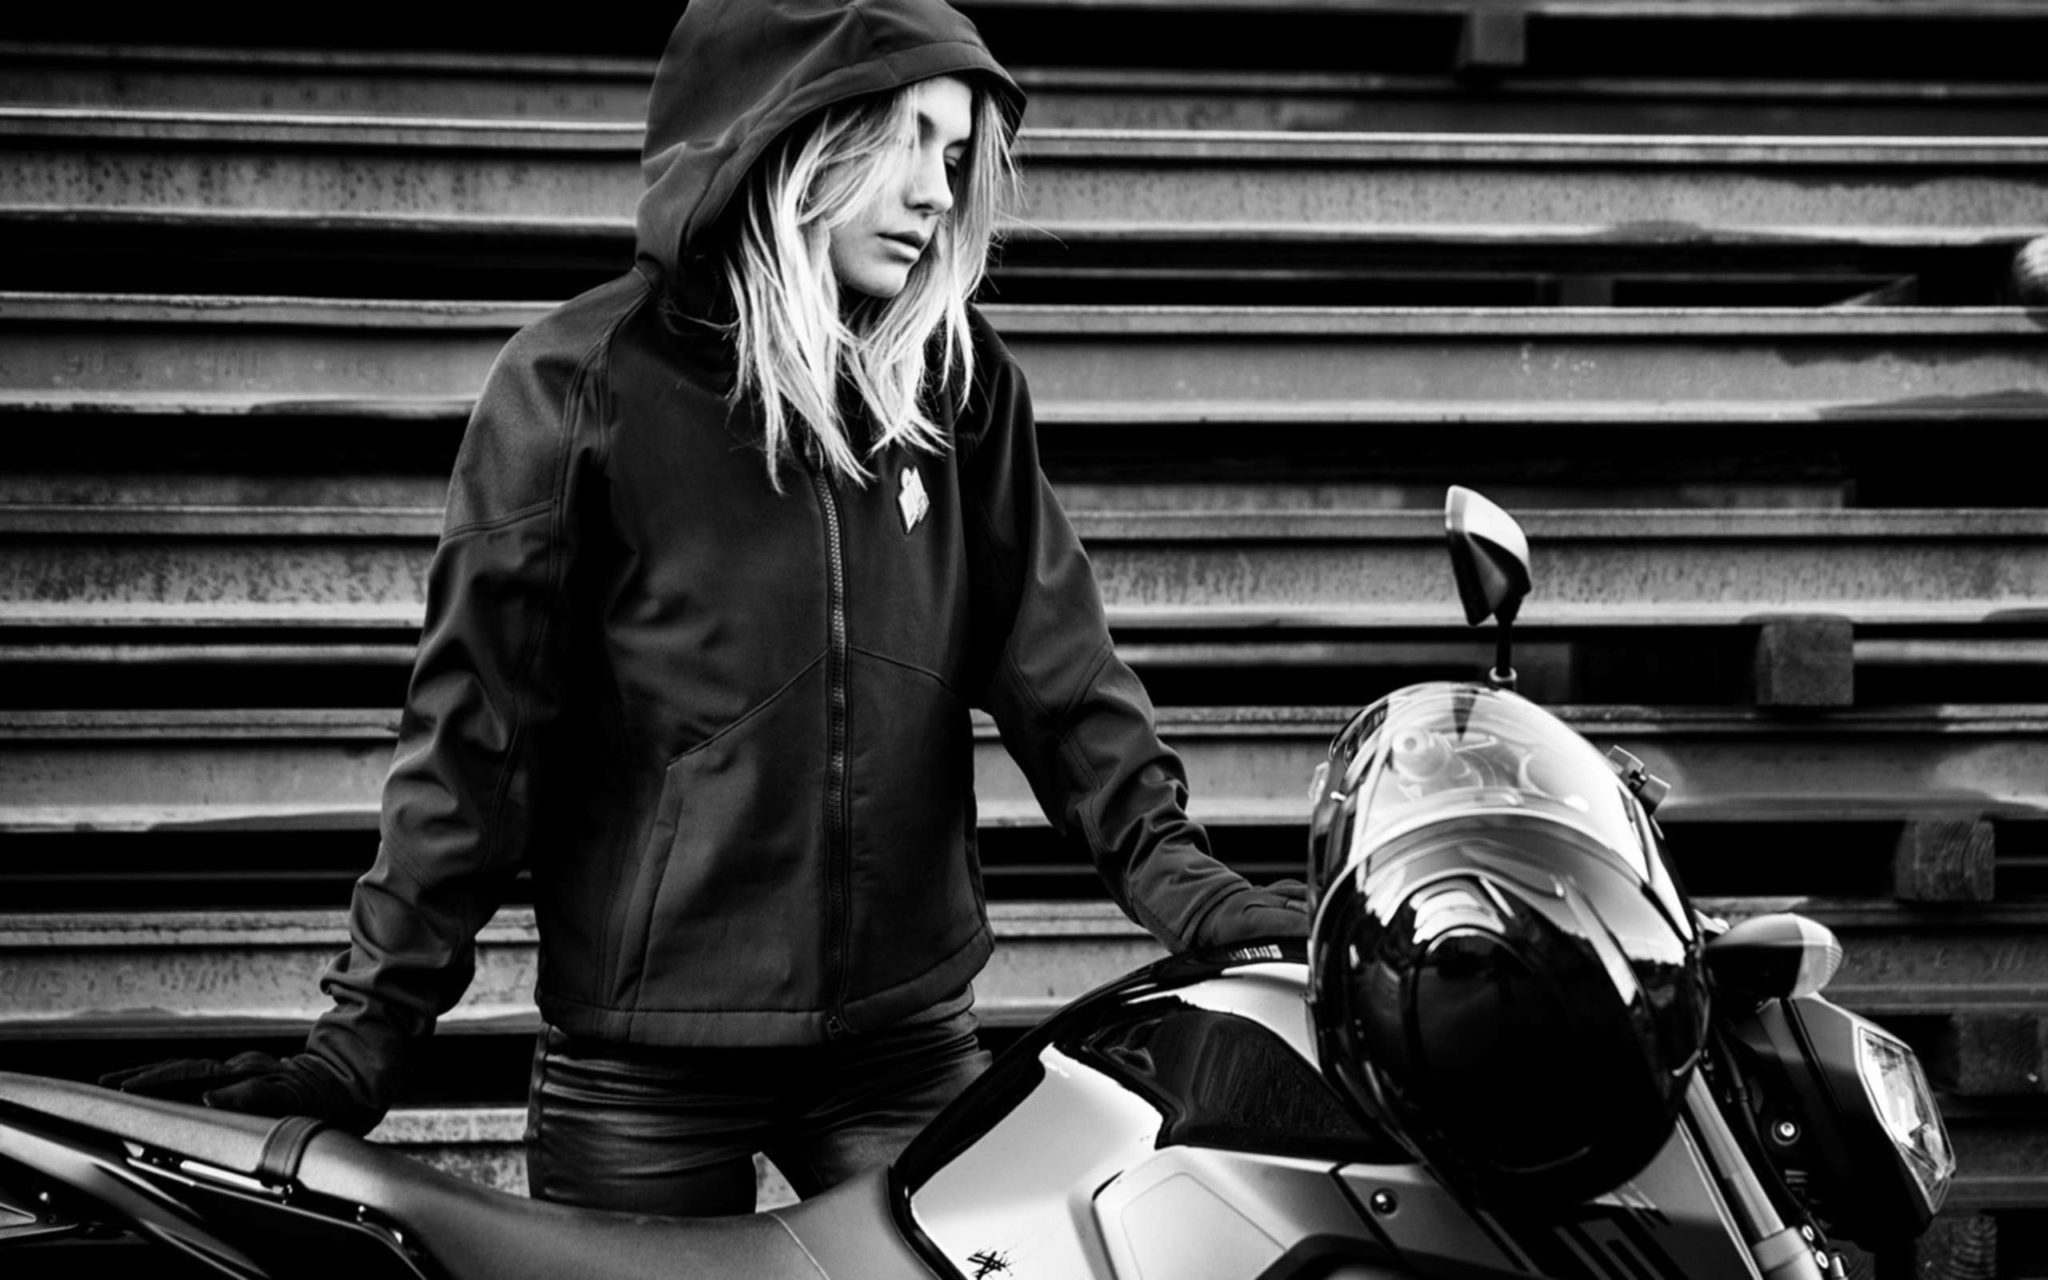 Black and white photo of rider in hooded jacket getting ready to ride